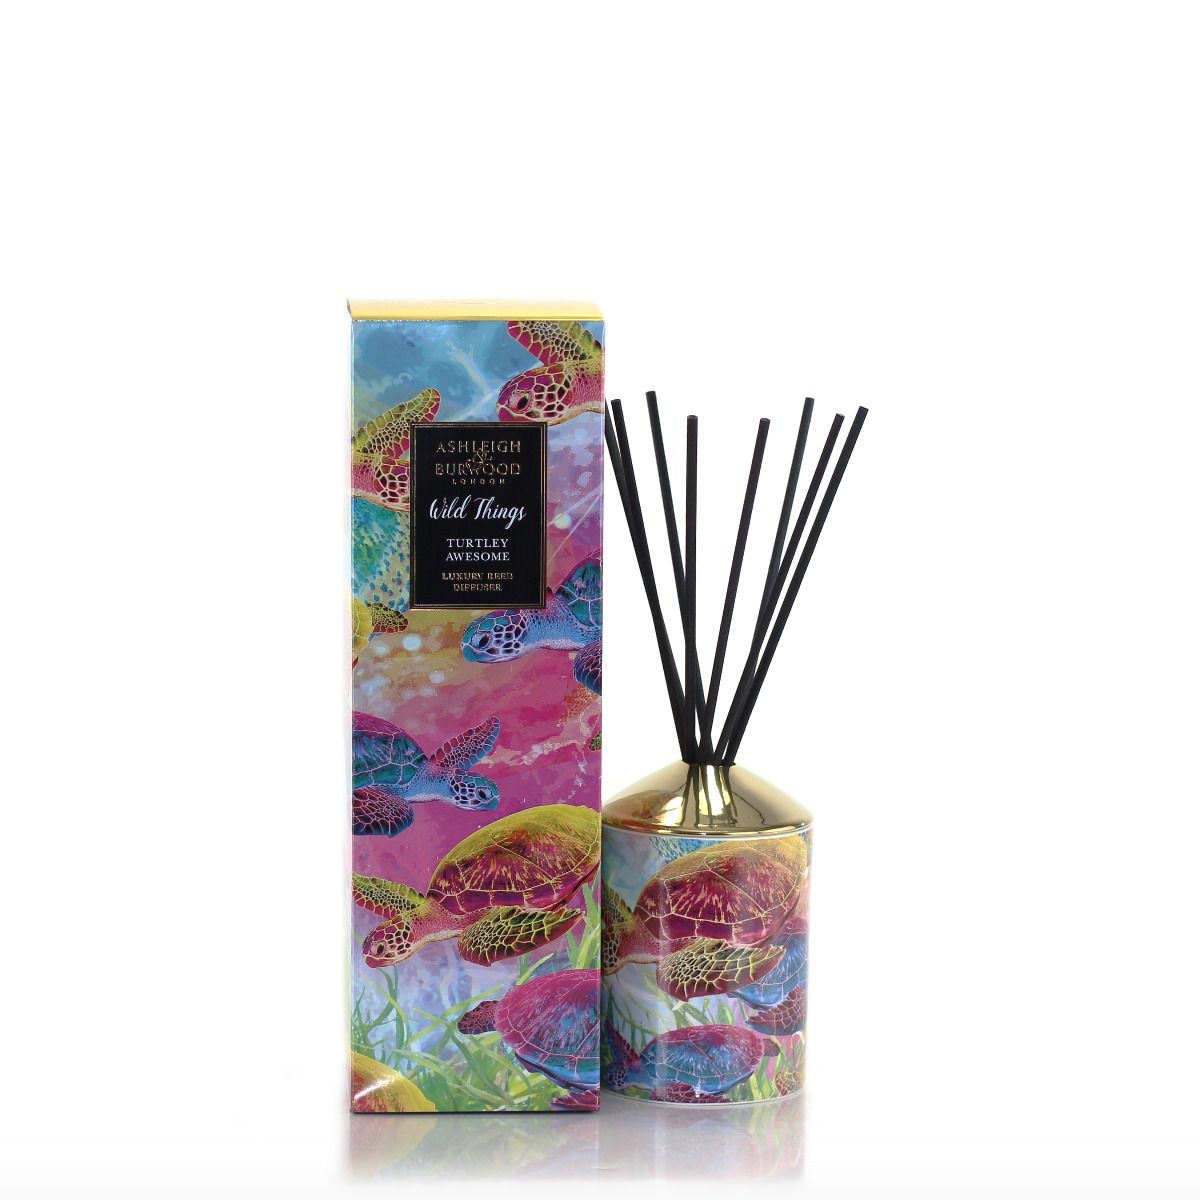 Turtley Awesome Wild Things Diffuser 200ml